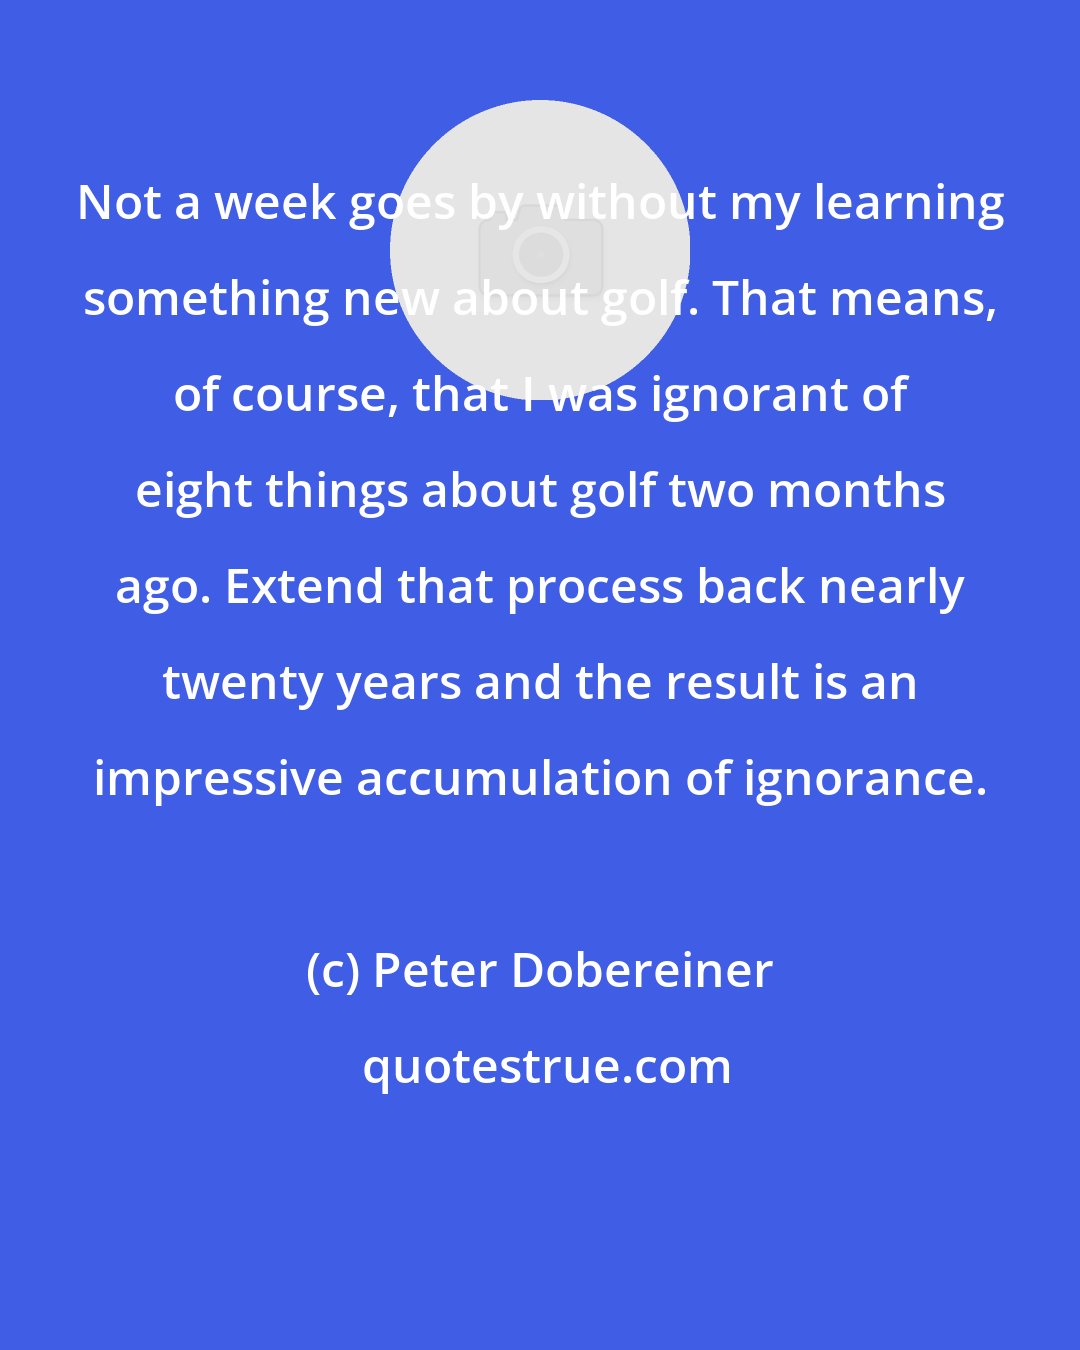 Peter Dobereiner: Not a week goes by without my learning something new about golf. That means, of course, that I was ignorant of eight things about golf two months ago. Extend that process back nearly twenty years and the result is an impressive accumulation of ignorance.